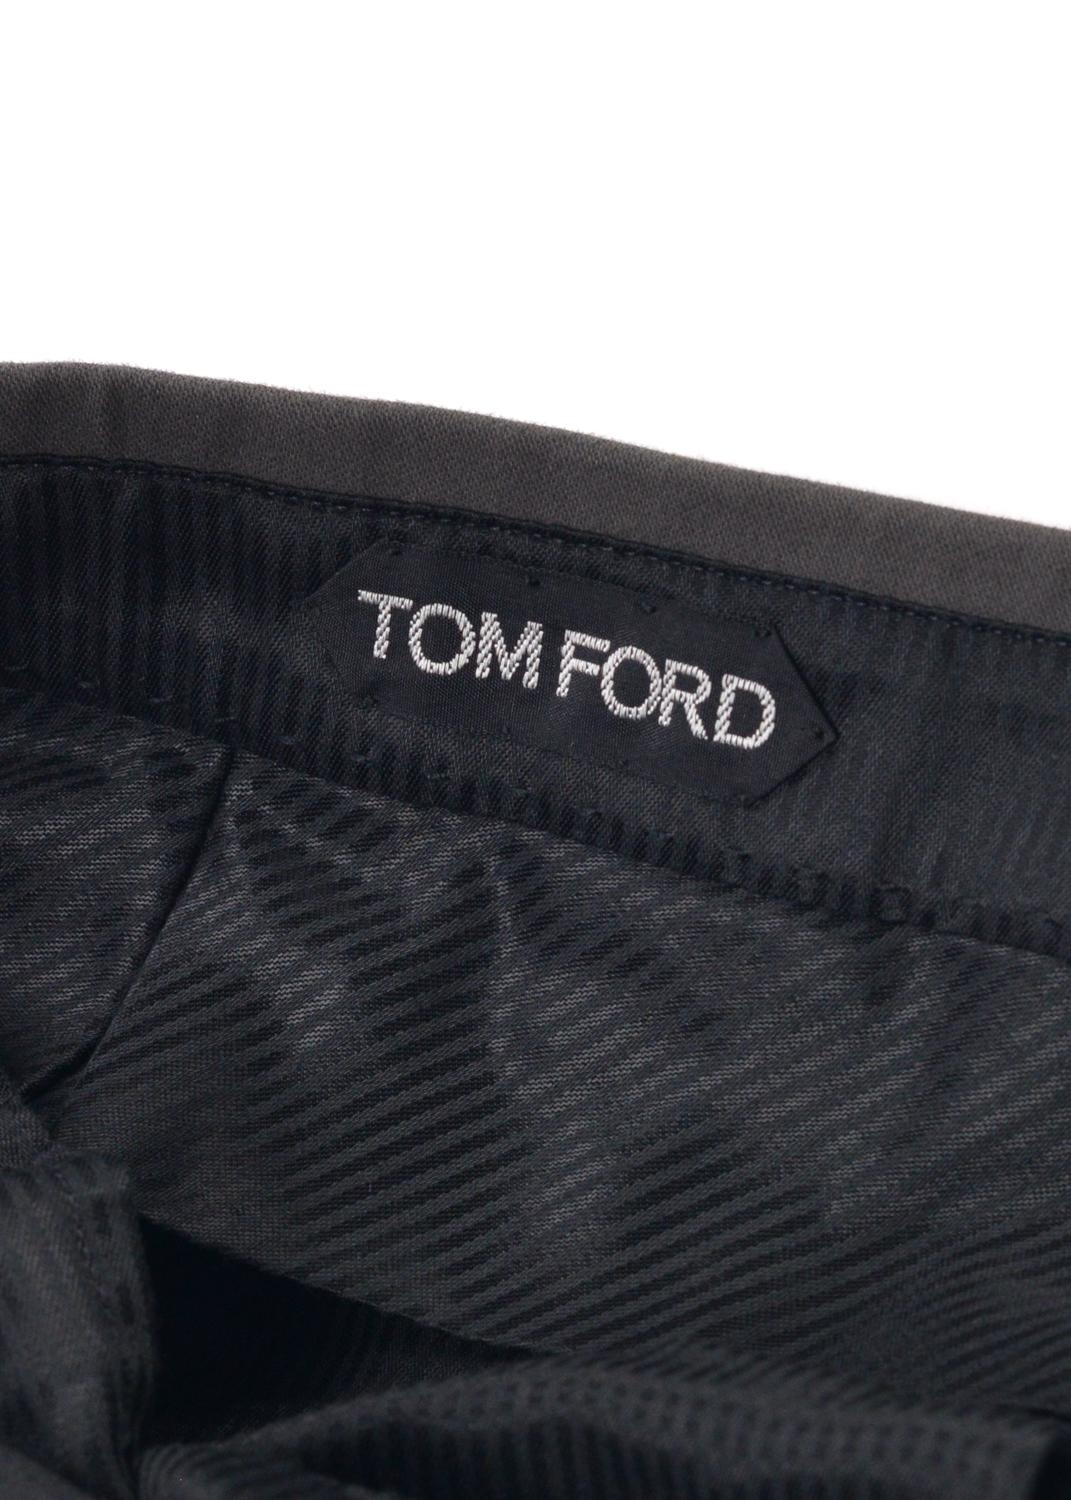 Tom Ford Men's Grey Cotton Pleated Front Trousers In New Condition For Sale In Brooklyn, NY